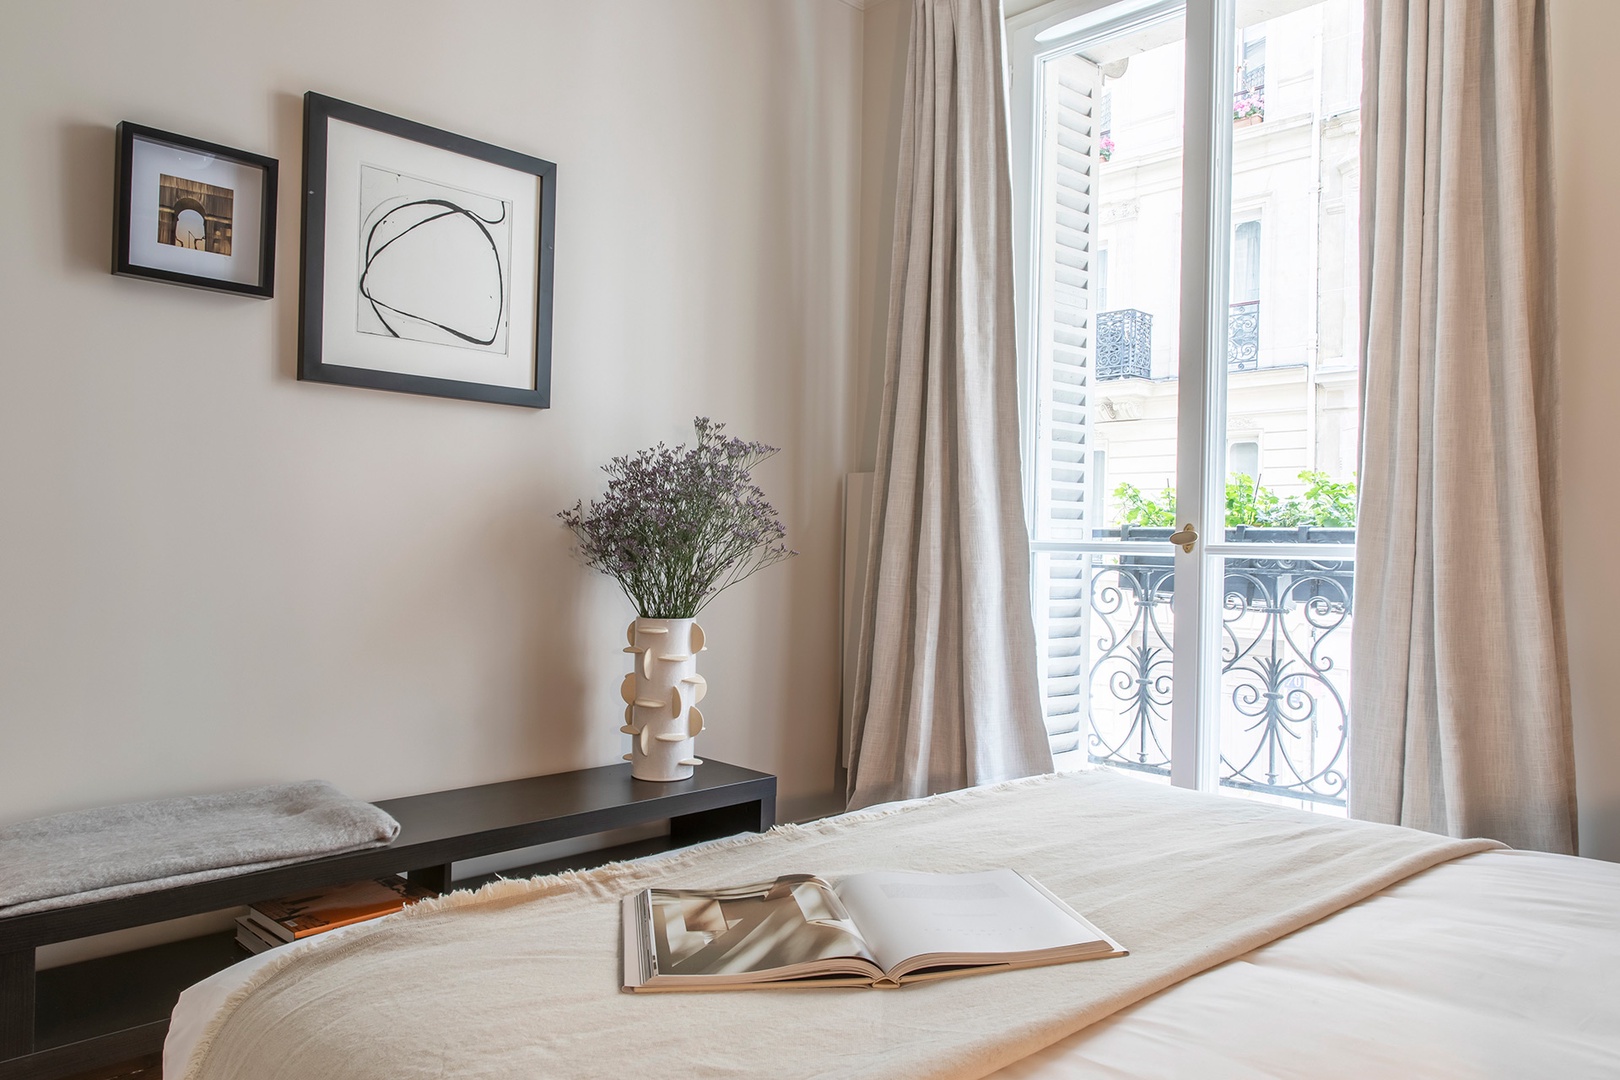 Relax in bed and enjoy a view of classic Parisian architecture.